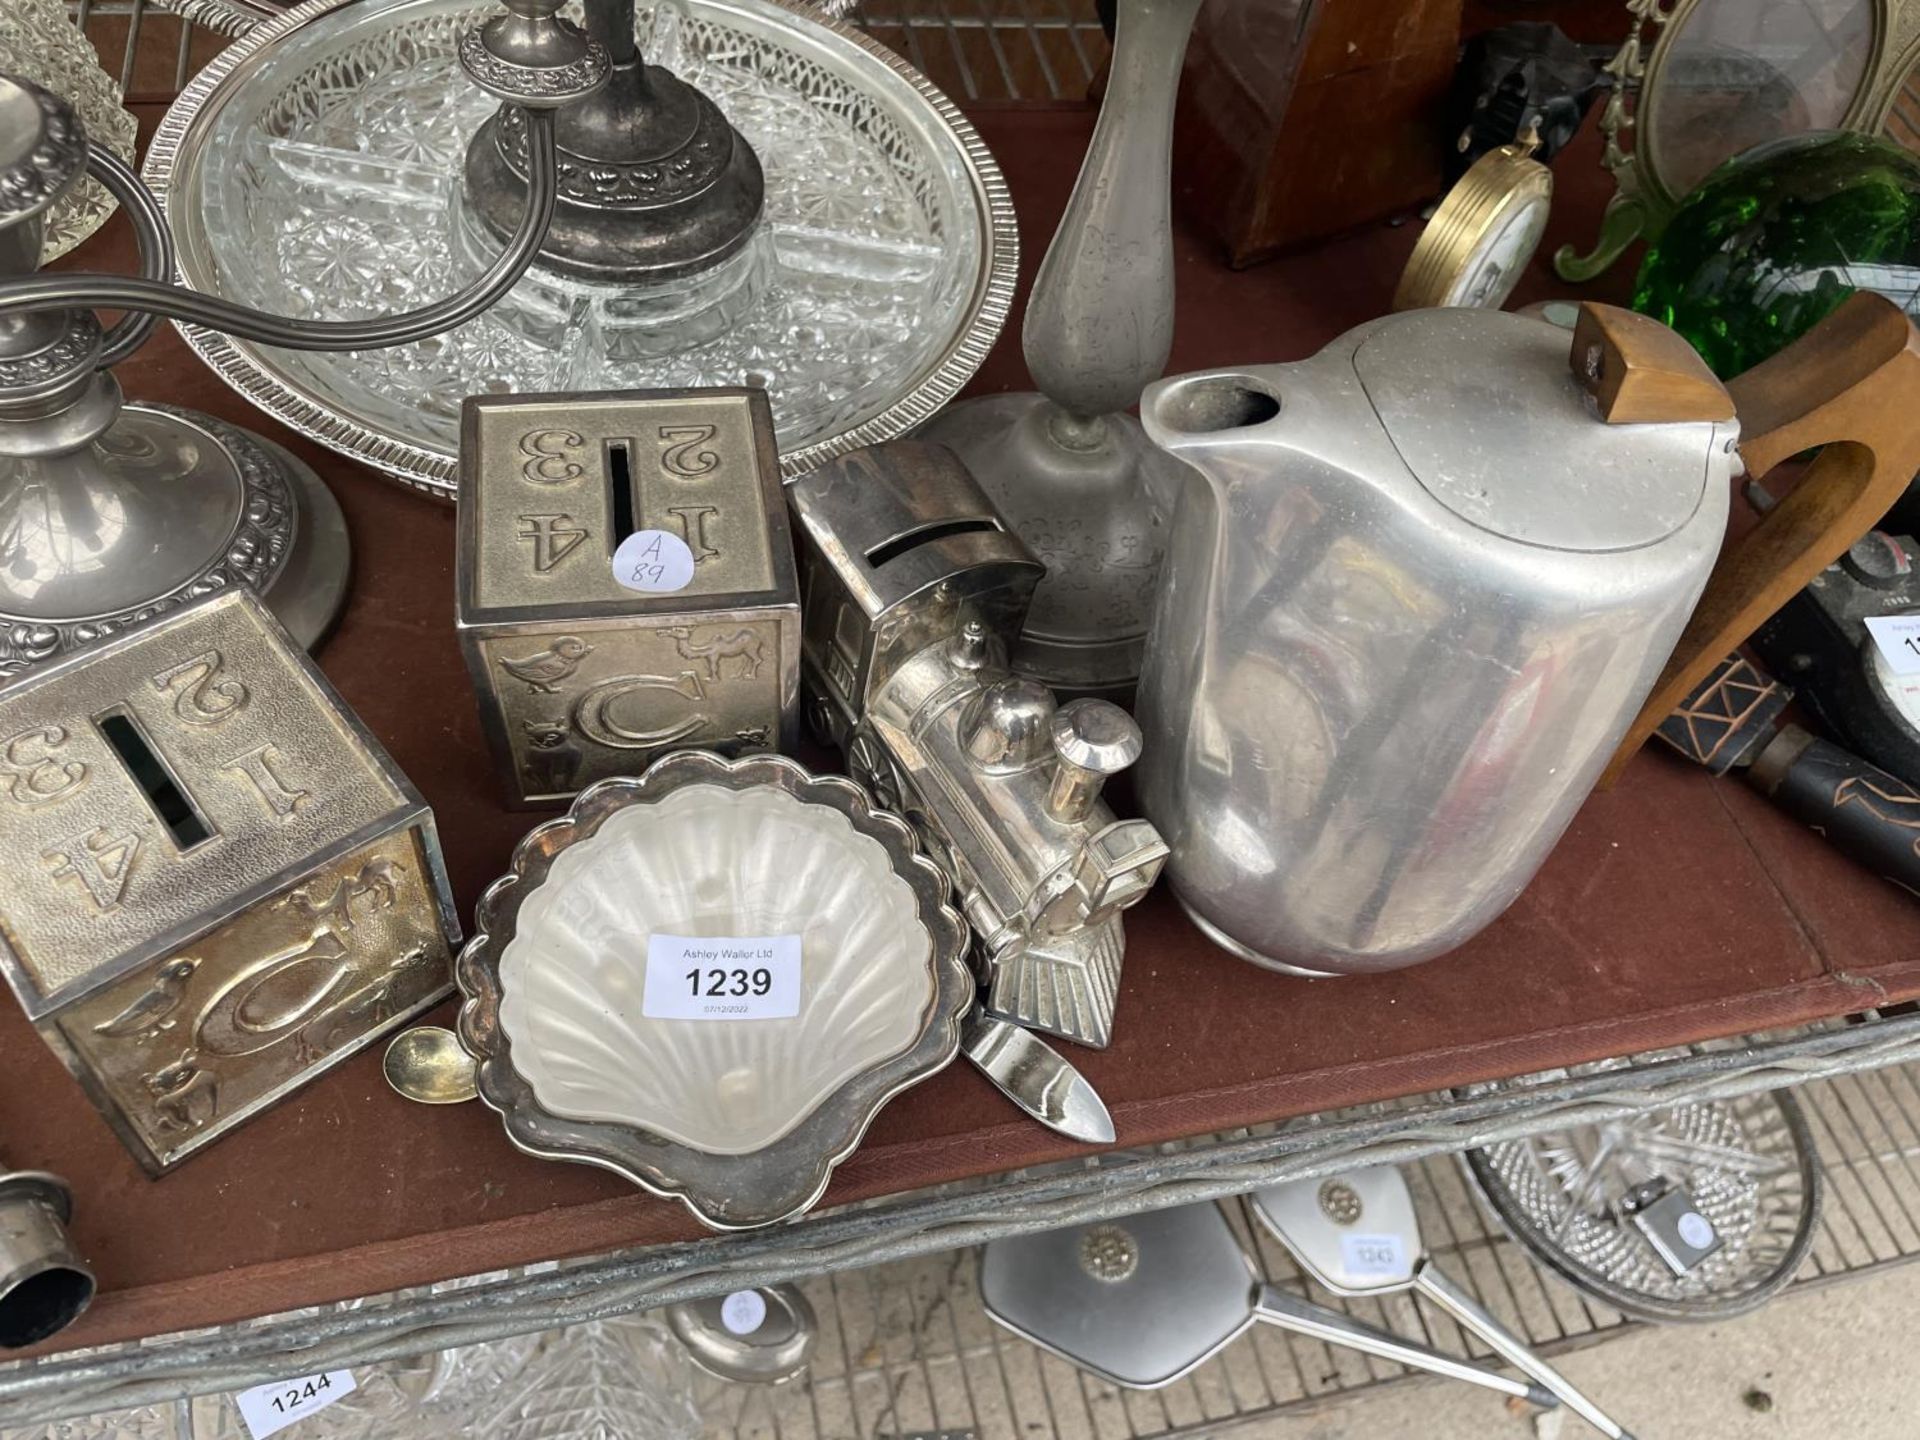 A LARGE ASSORTMENT OF METAL WARE ITEMS TO INCLUDE A PICQUOT WARE TEAPOT, CANDKLE STICKS AND A - Image 4 of 4